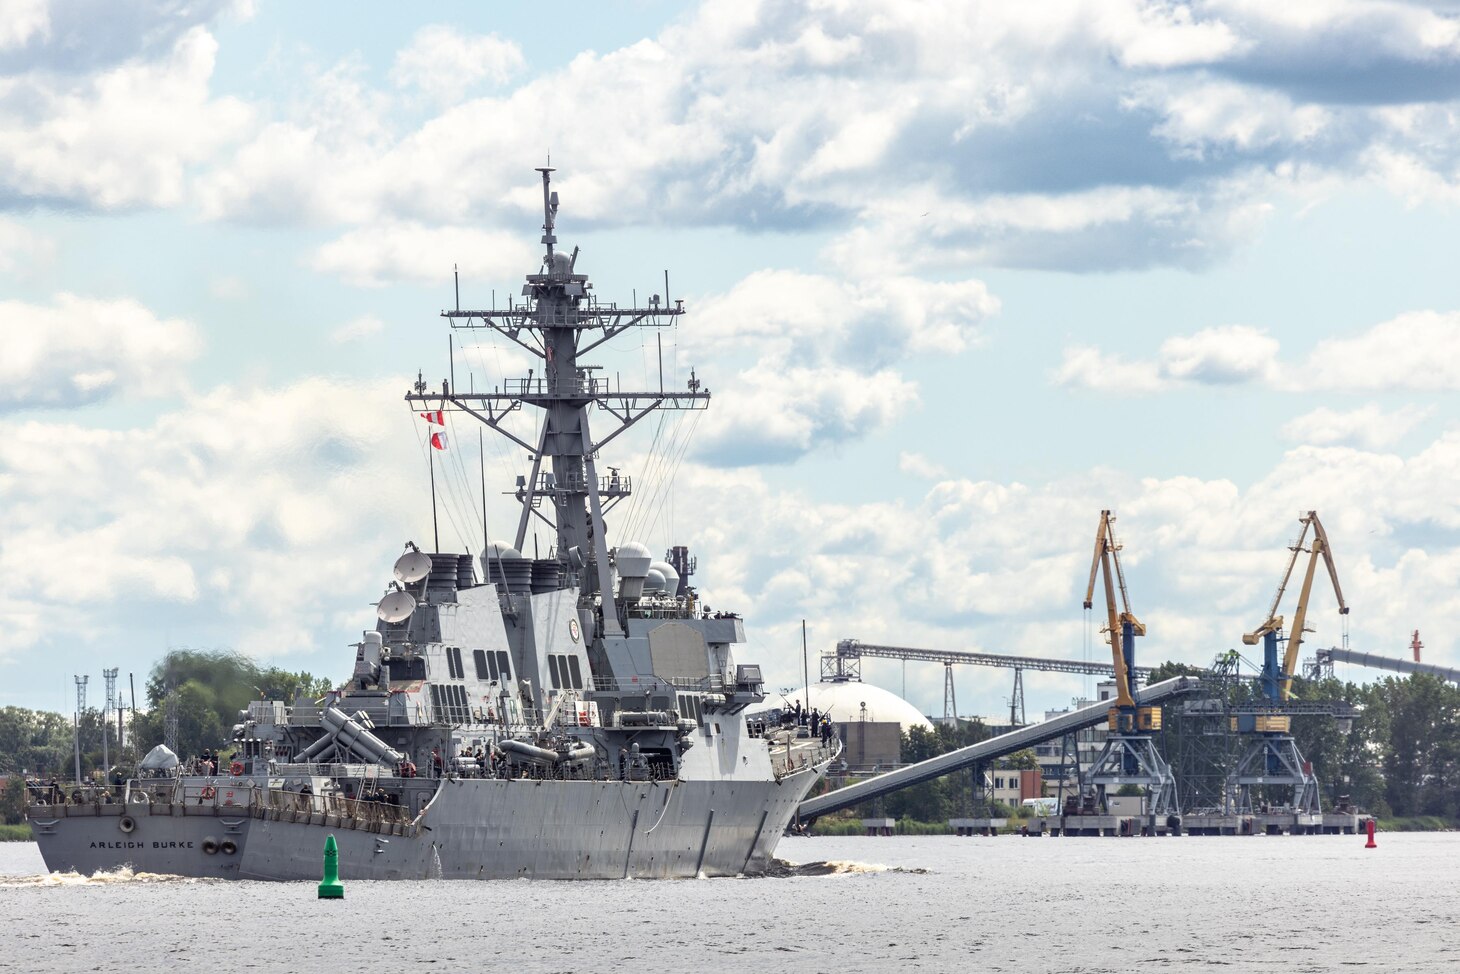 The Arleigh Burke-class guided-missile destroyer USS Arleigh Burke (DDG 51) arrived in Riga, Latvia for a scheduled port visit on July 9, 2022.